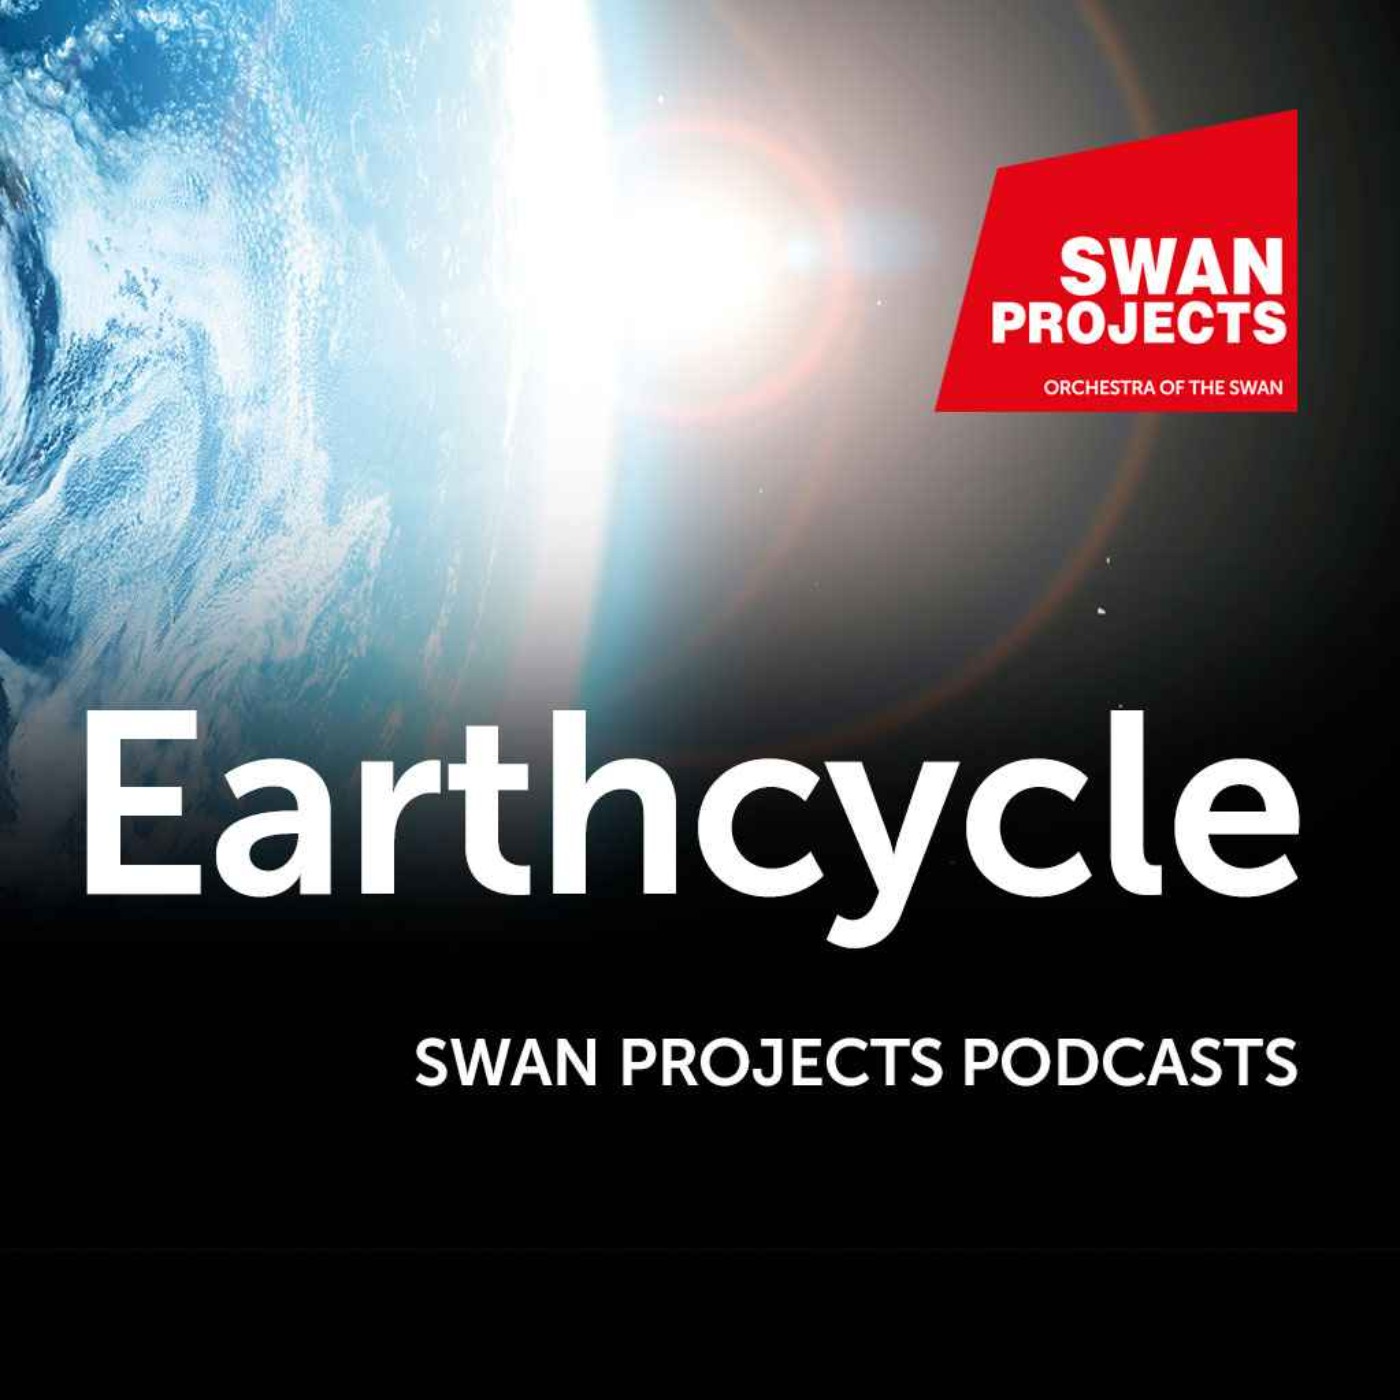 Earthcycle - A Swan Project Podcast with George Monbiot